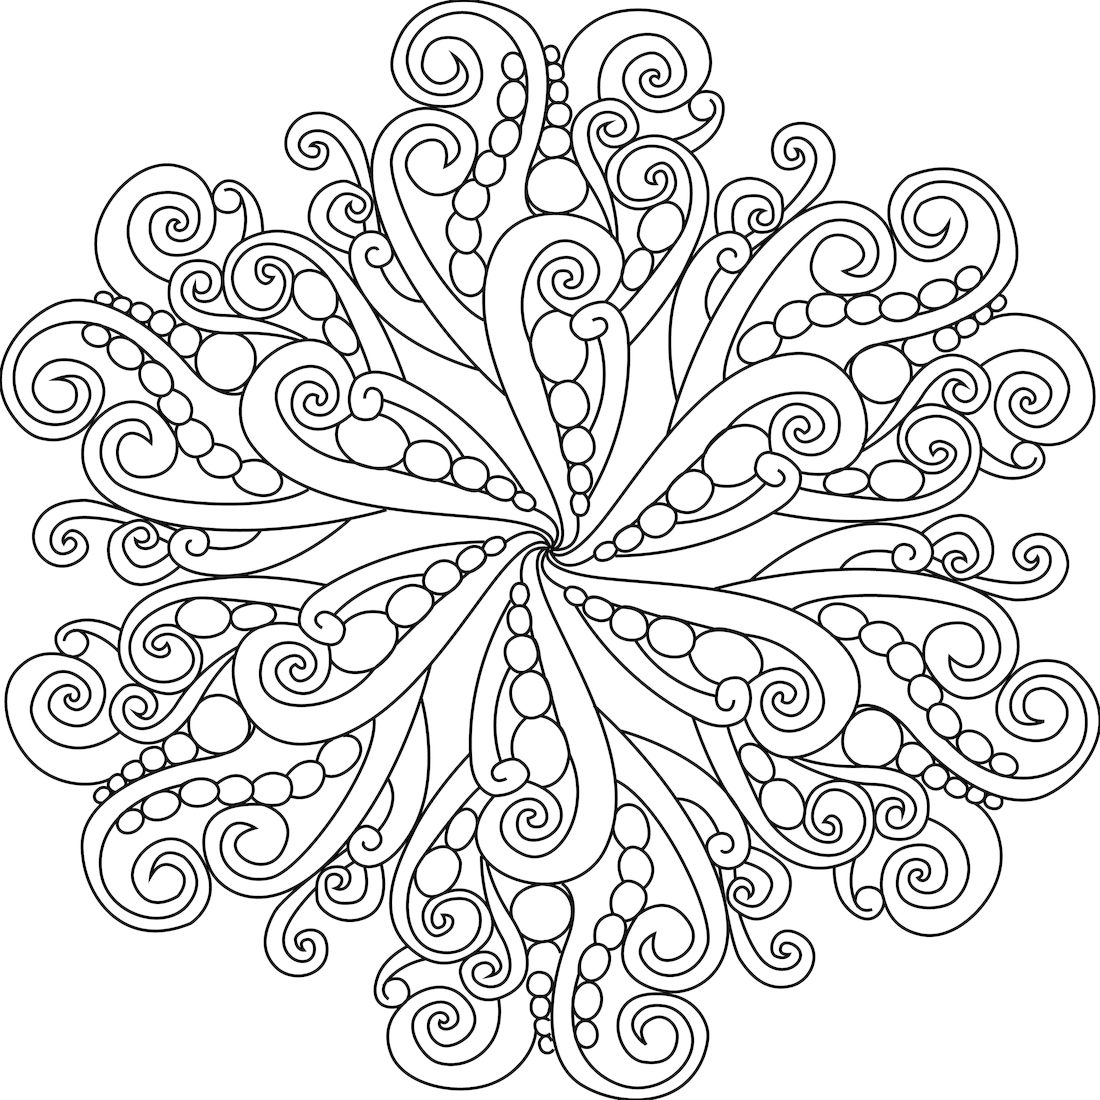 Download 40 Best Mandala Coloring Pages To Practice Your Focus ...